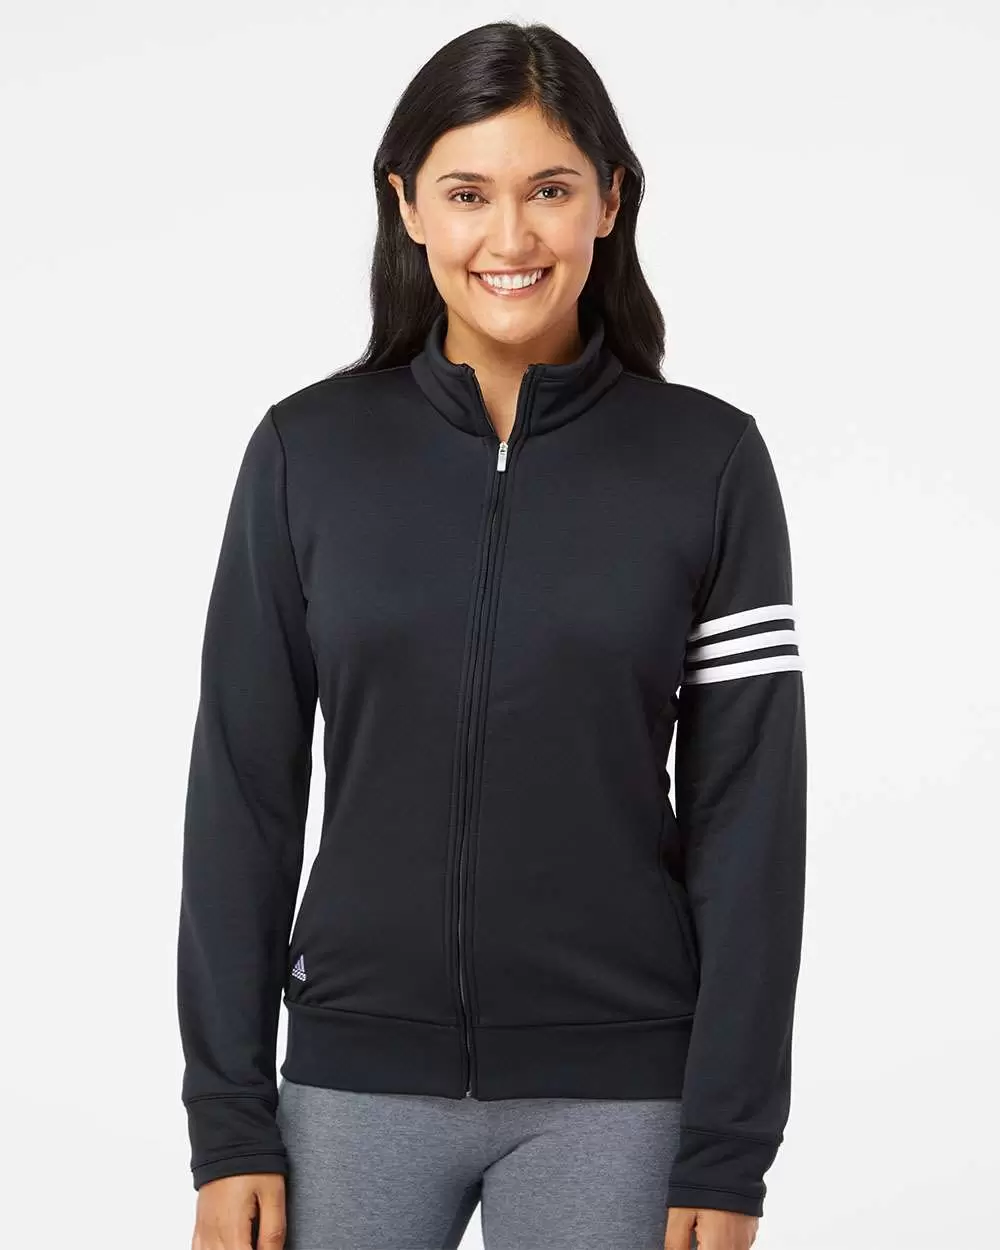 A191 adidas - Ladies' ClimaLite® 3-Stripes French Terry Full-Zip